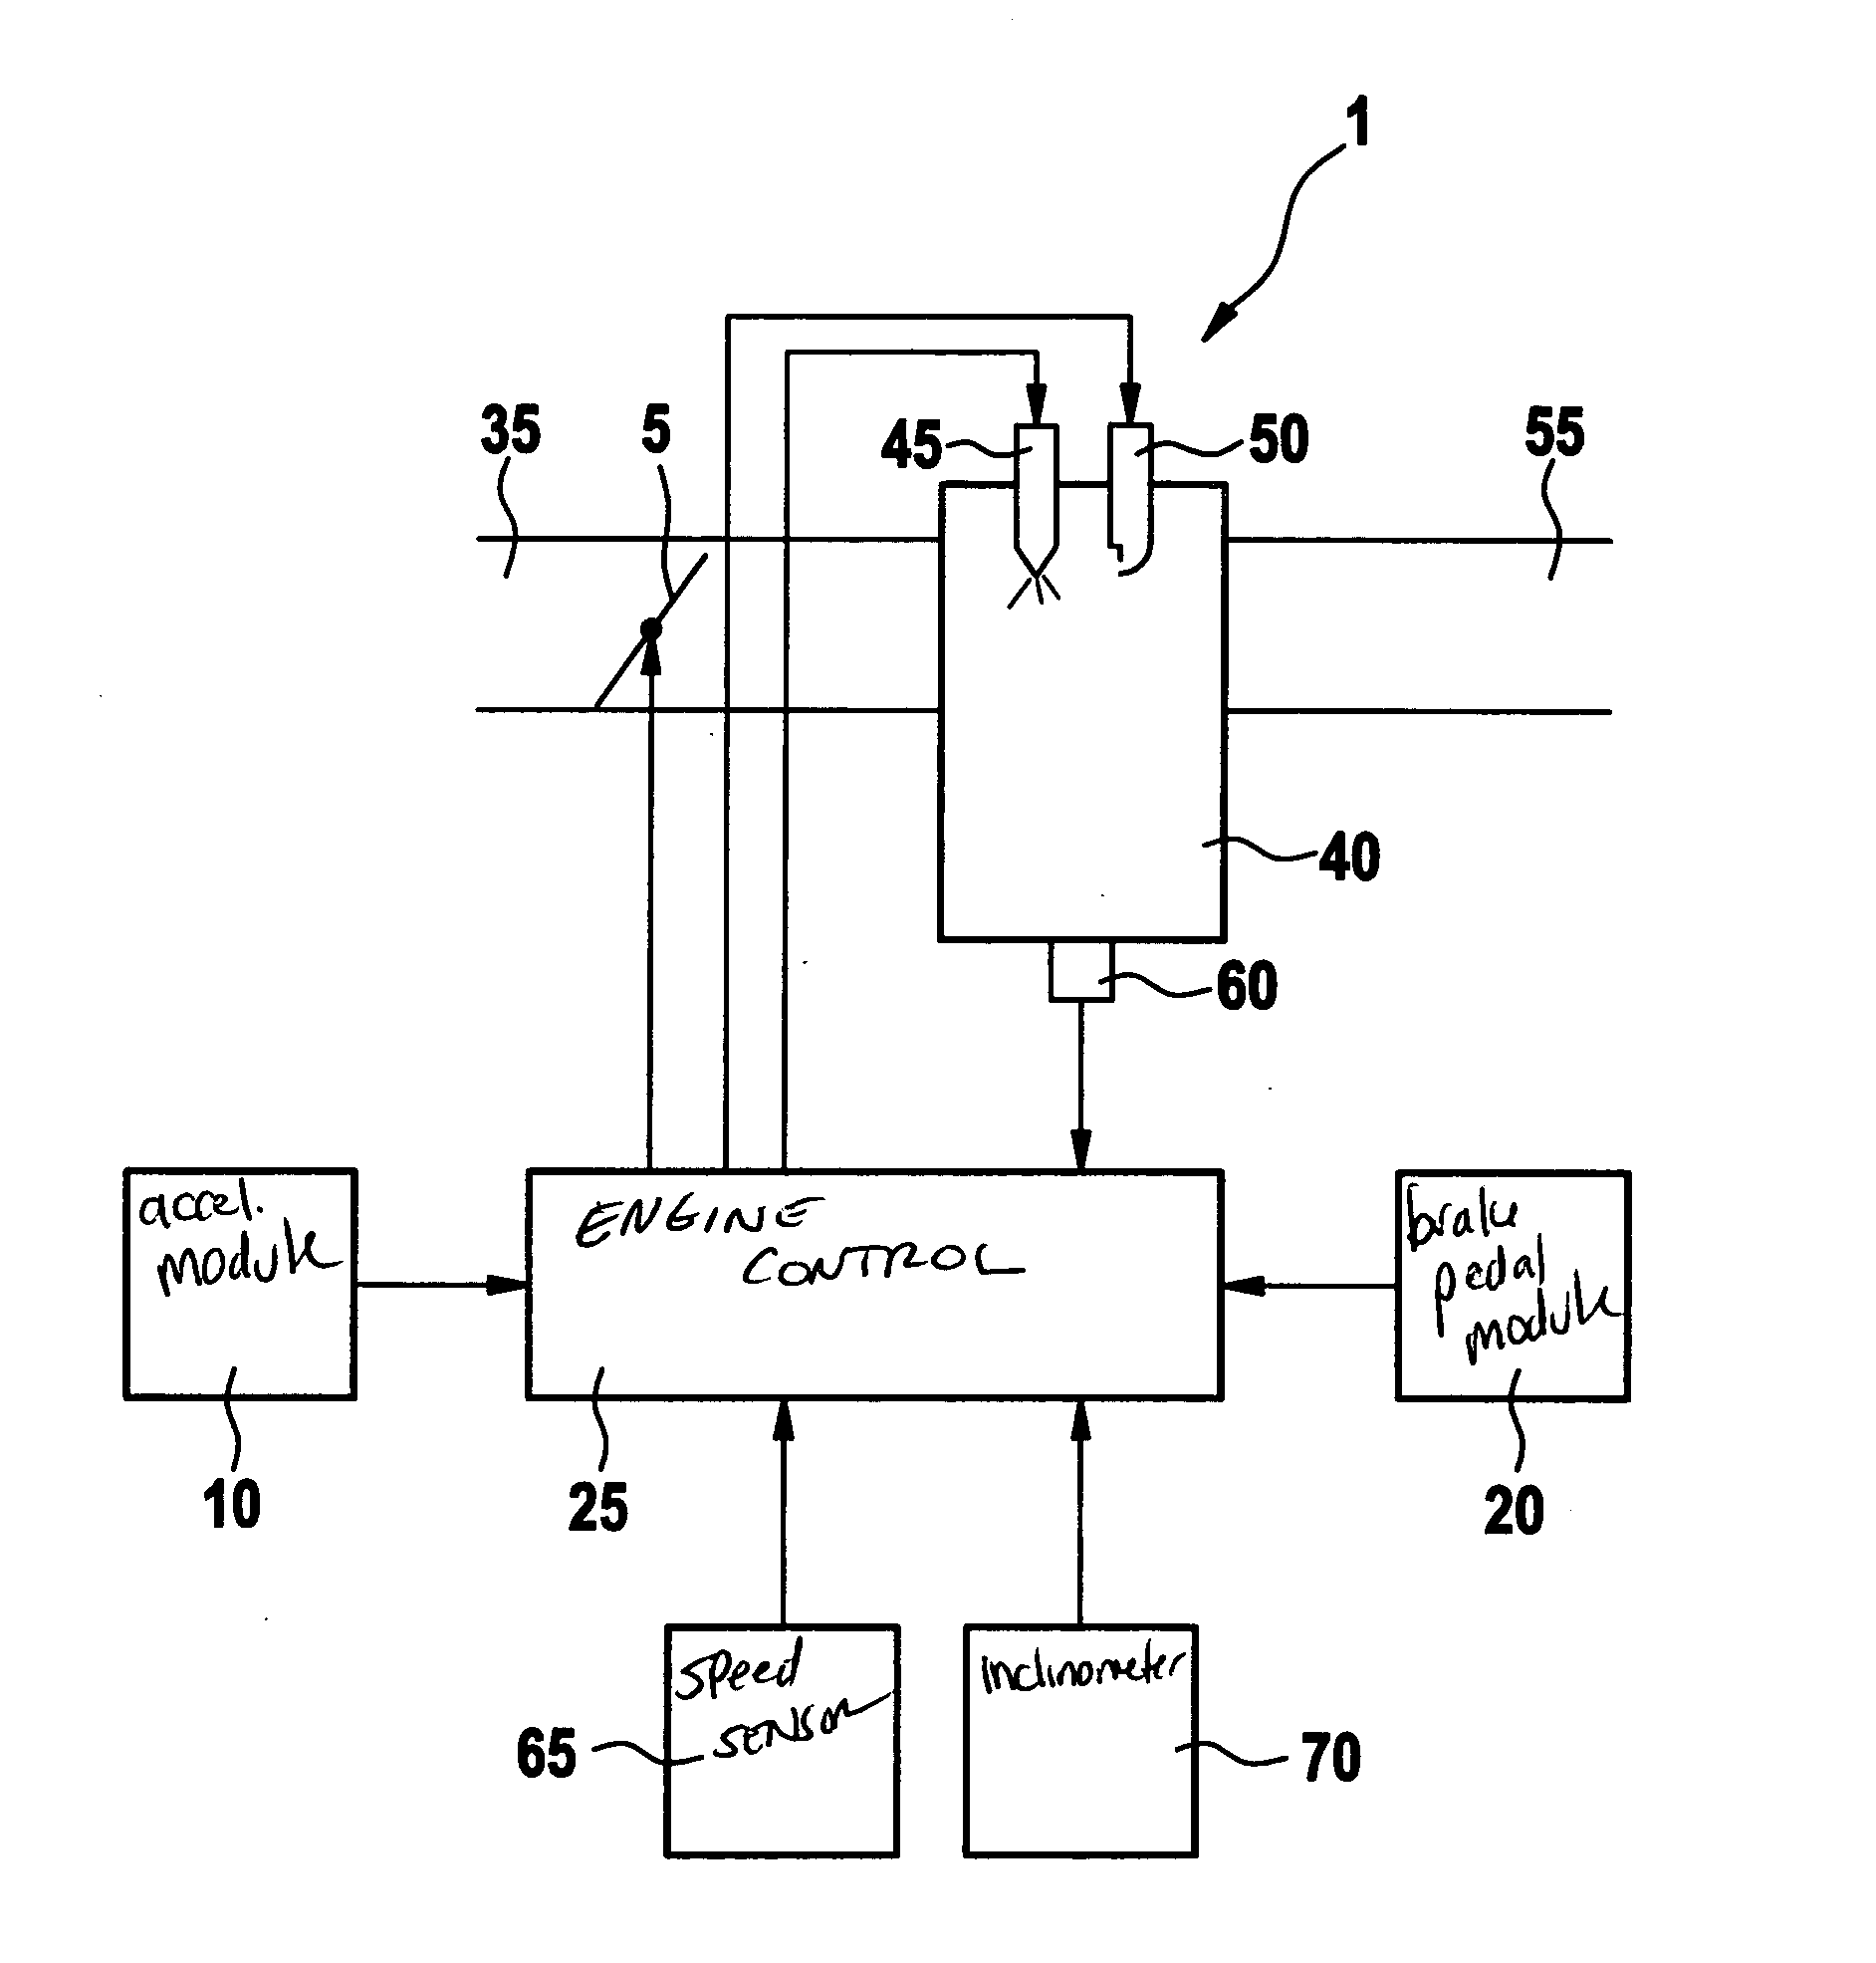 Method and device for operating a vehicle having an internal combustion engine